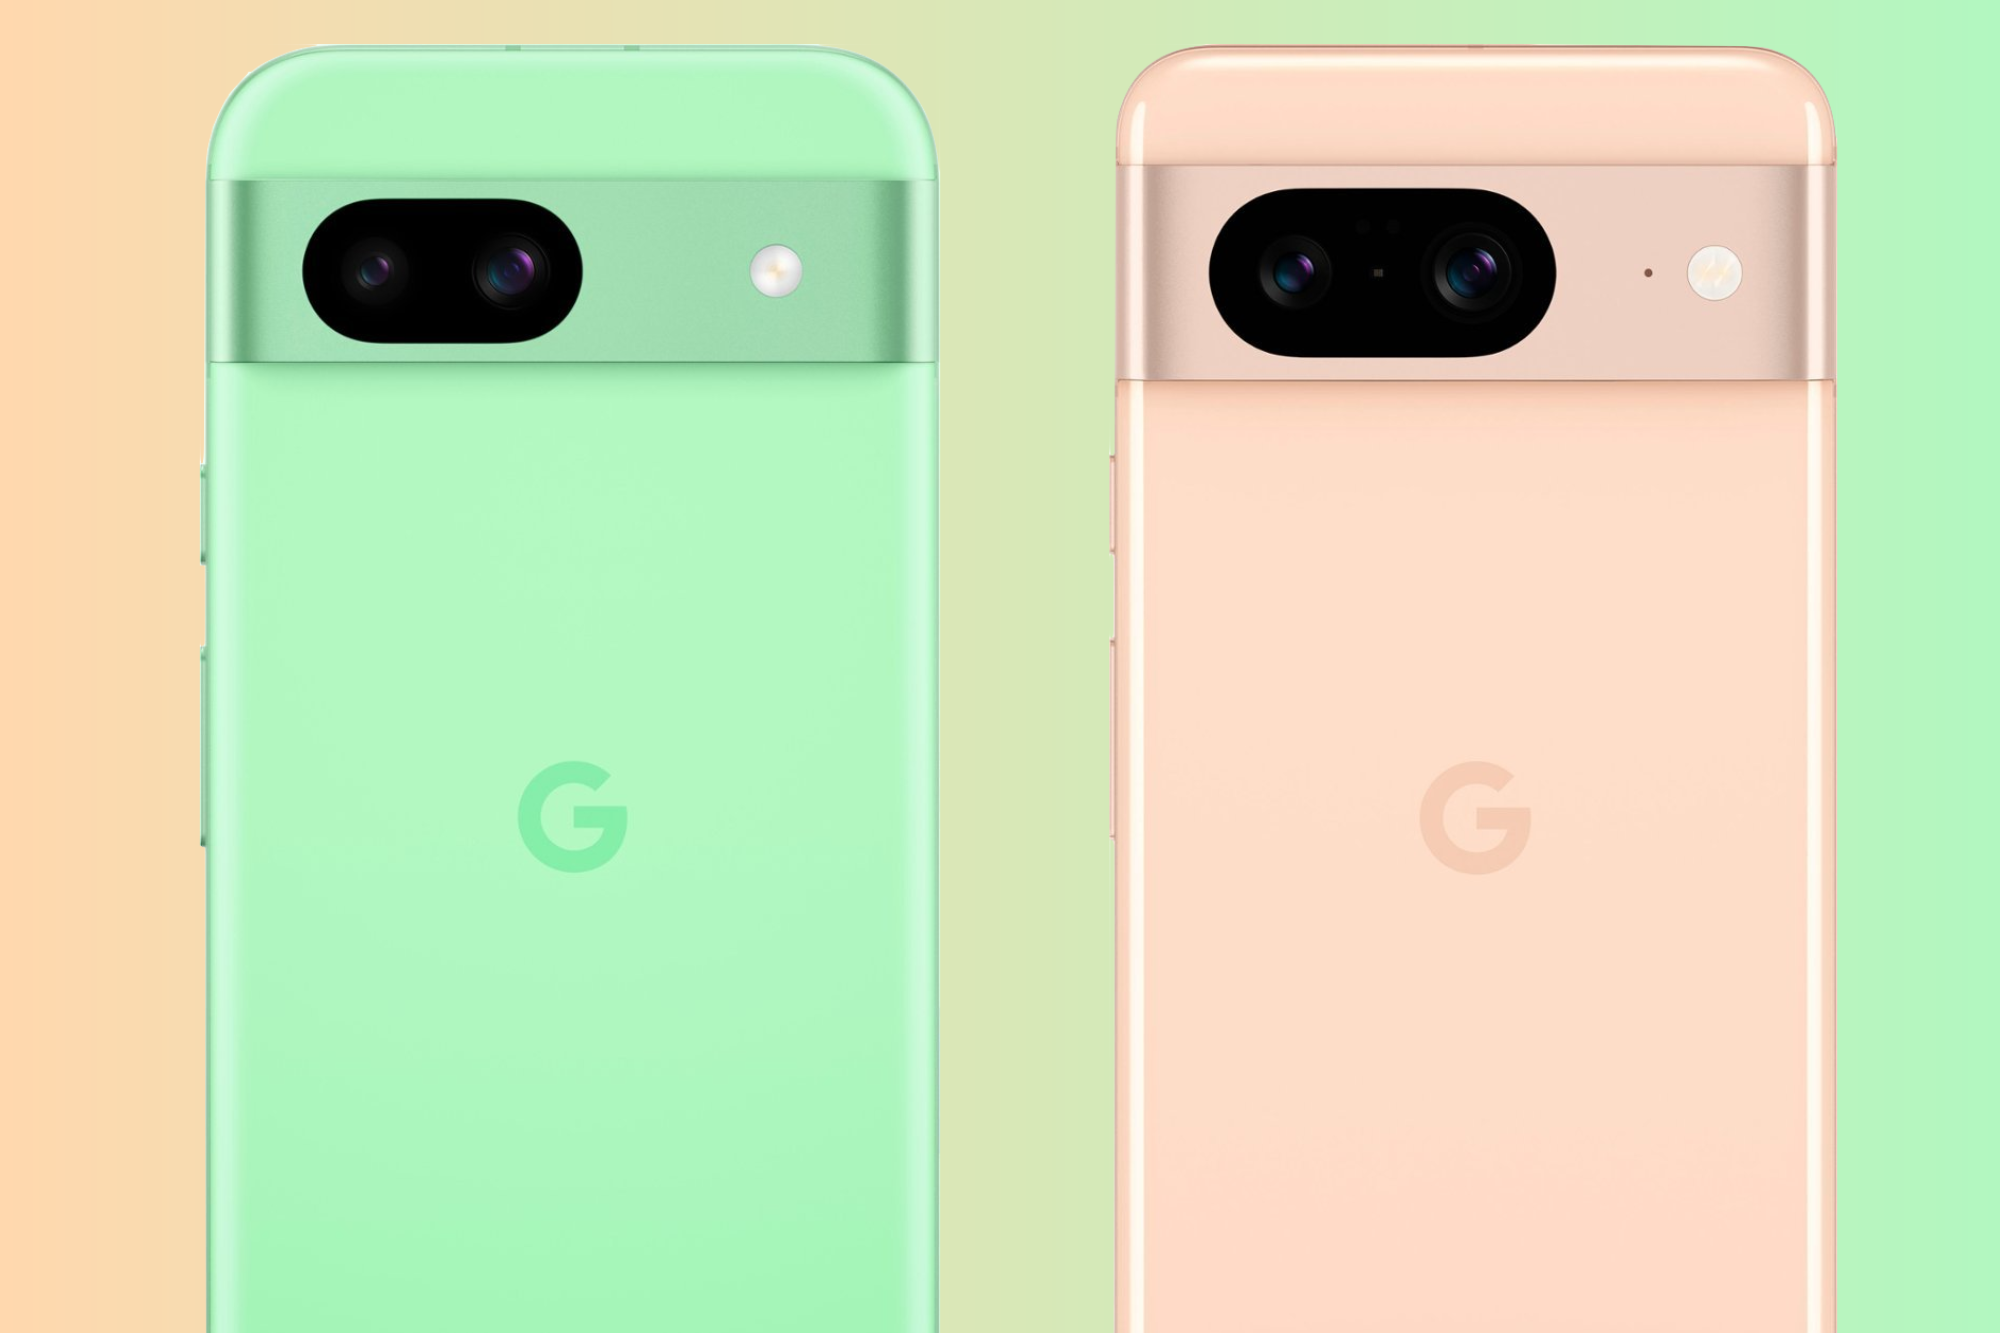 Renders of the Google Pixel 8a and Pixel 8 next to each other.